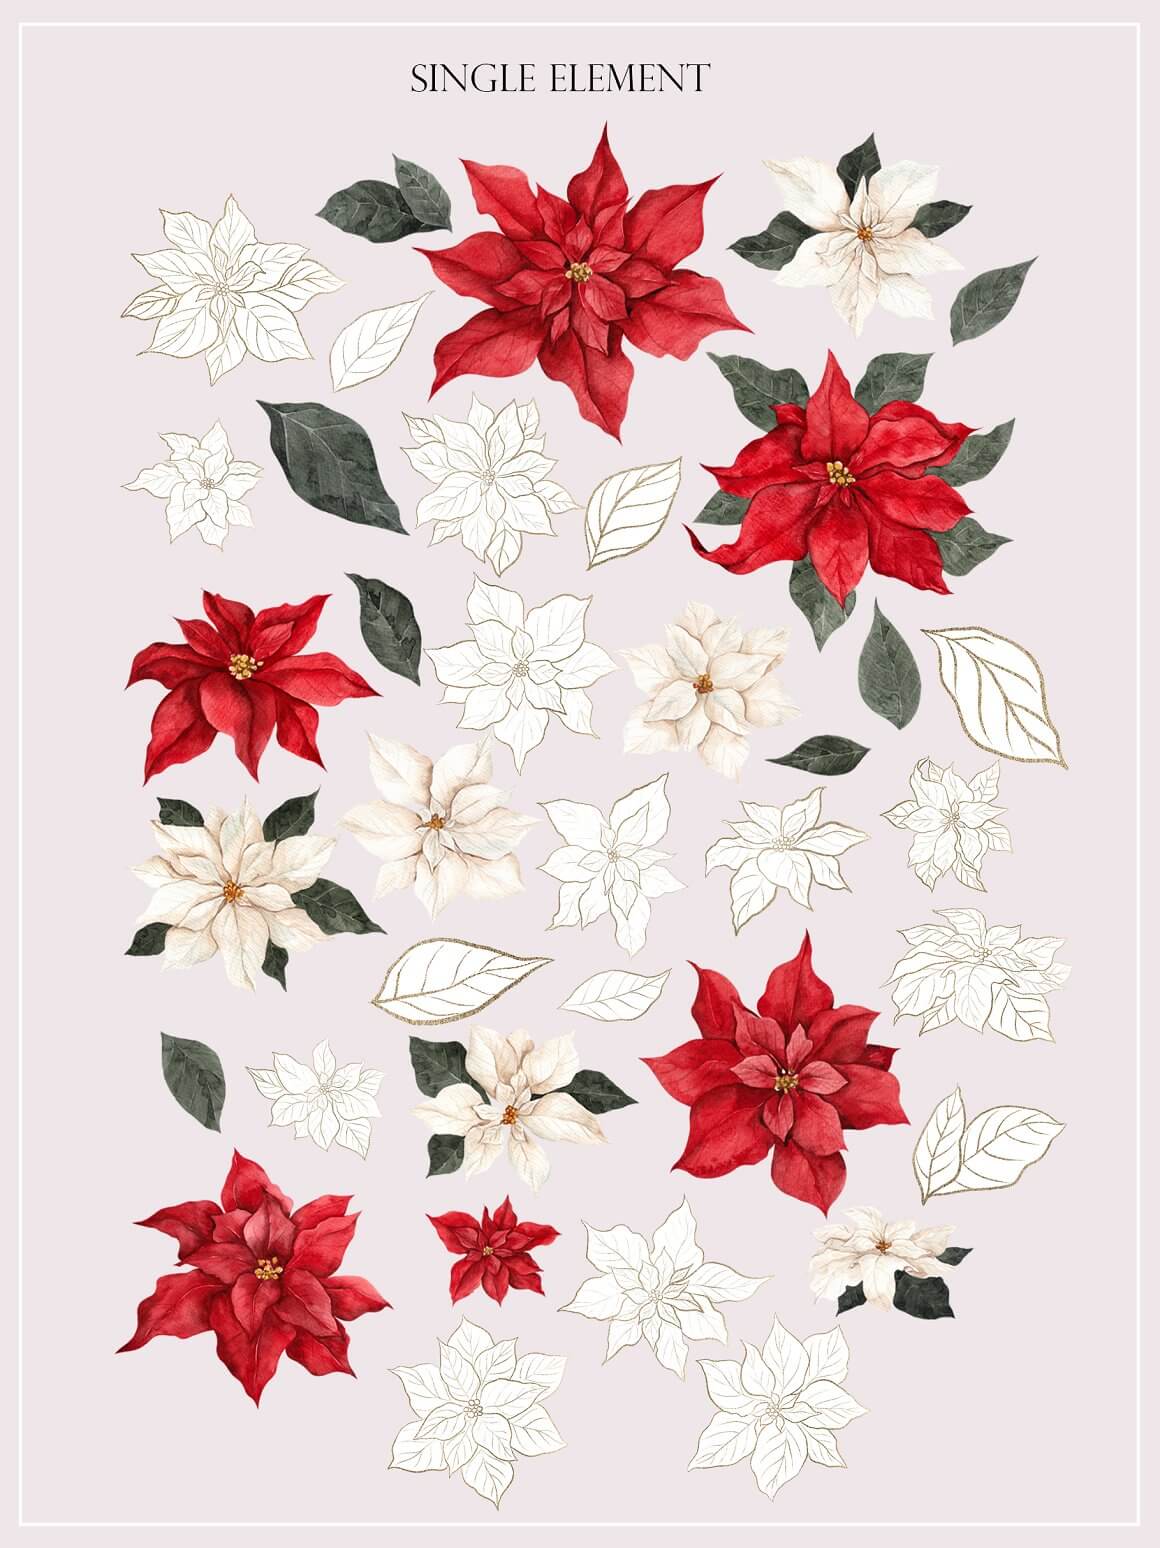 Single elements of the poinsettia plant.